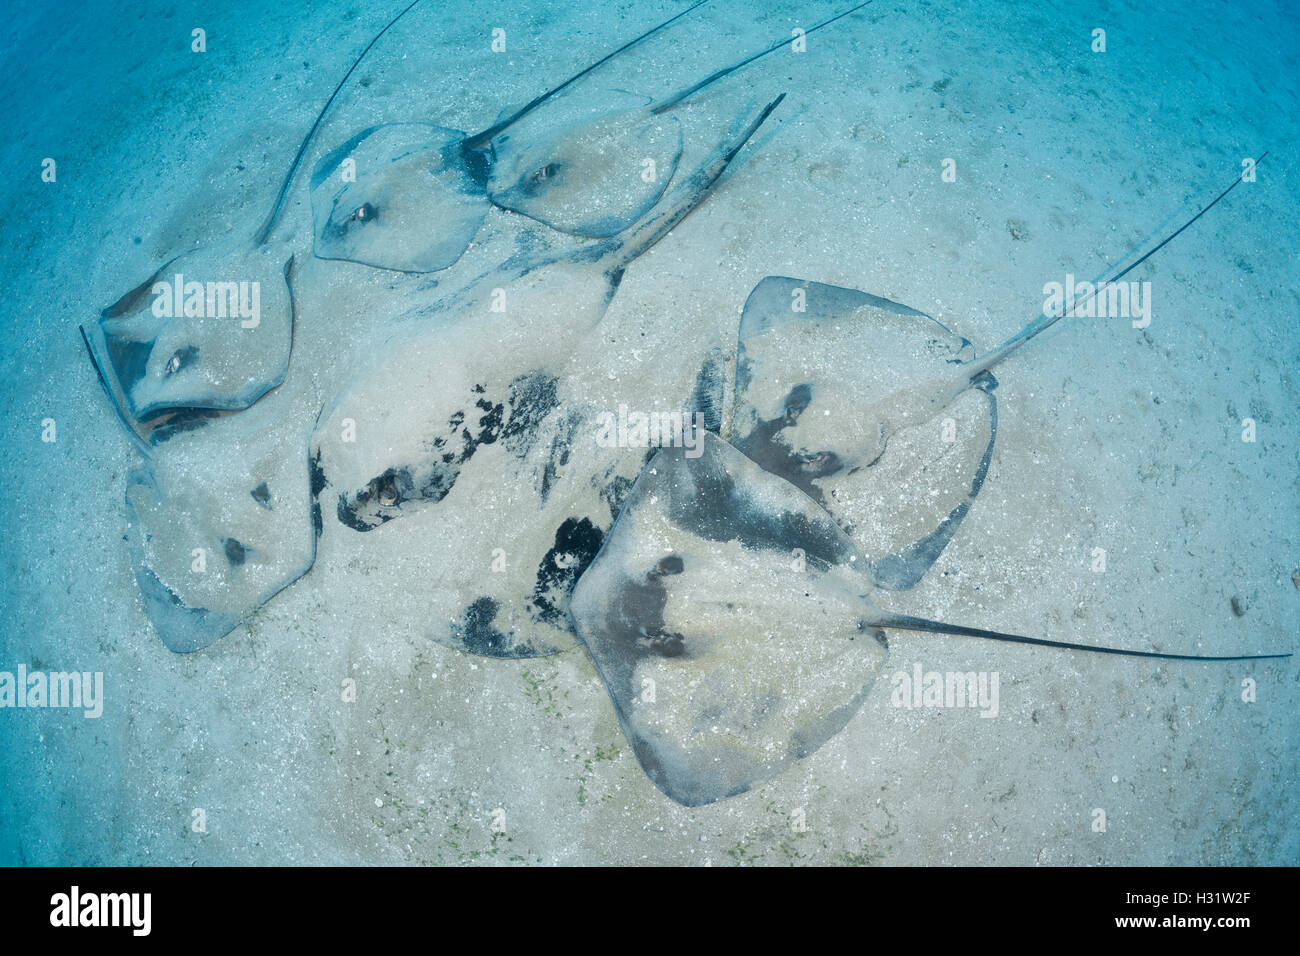 QZ51558-D. Marbled Stingray (Taeniura meyeni) buried and in the center of group of smaller Pink Whiprays (Himantura fai), on the Stock Photo